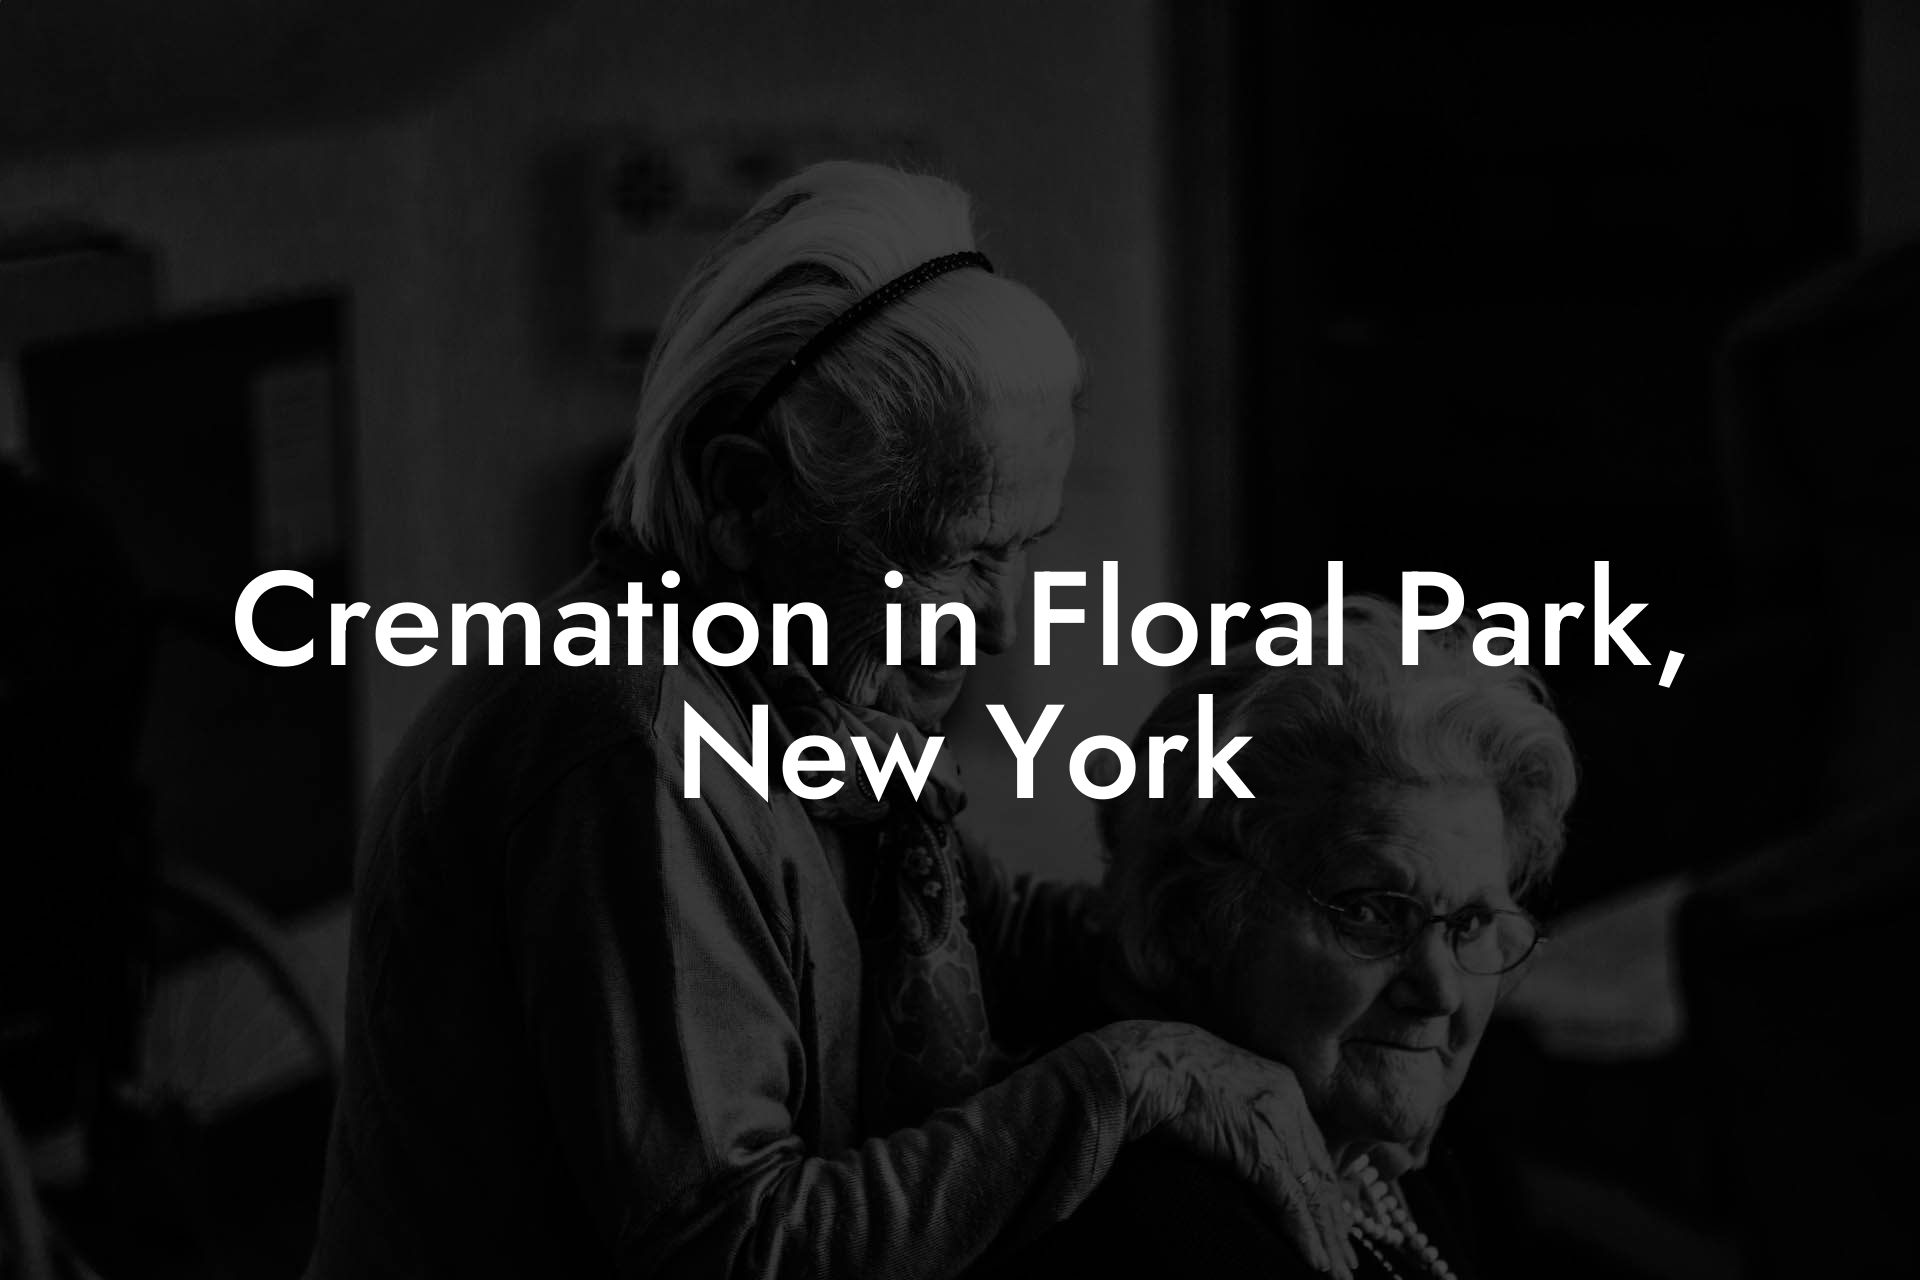 Cremation in Floral Park, New York